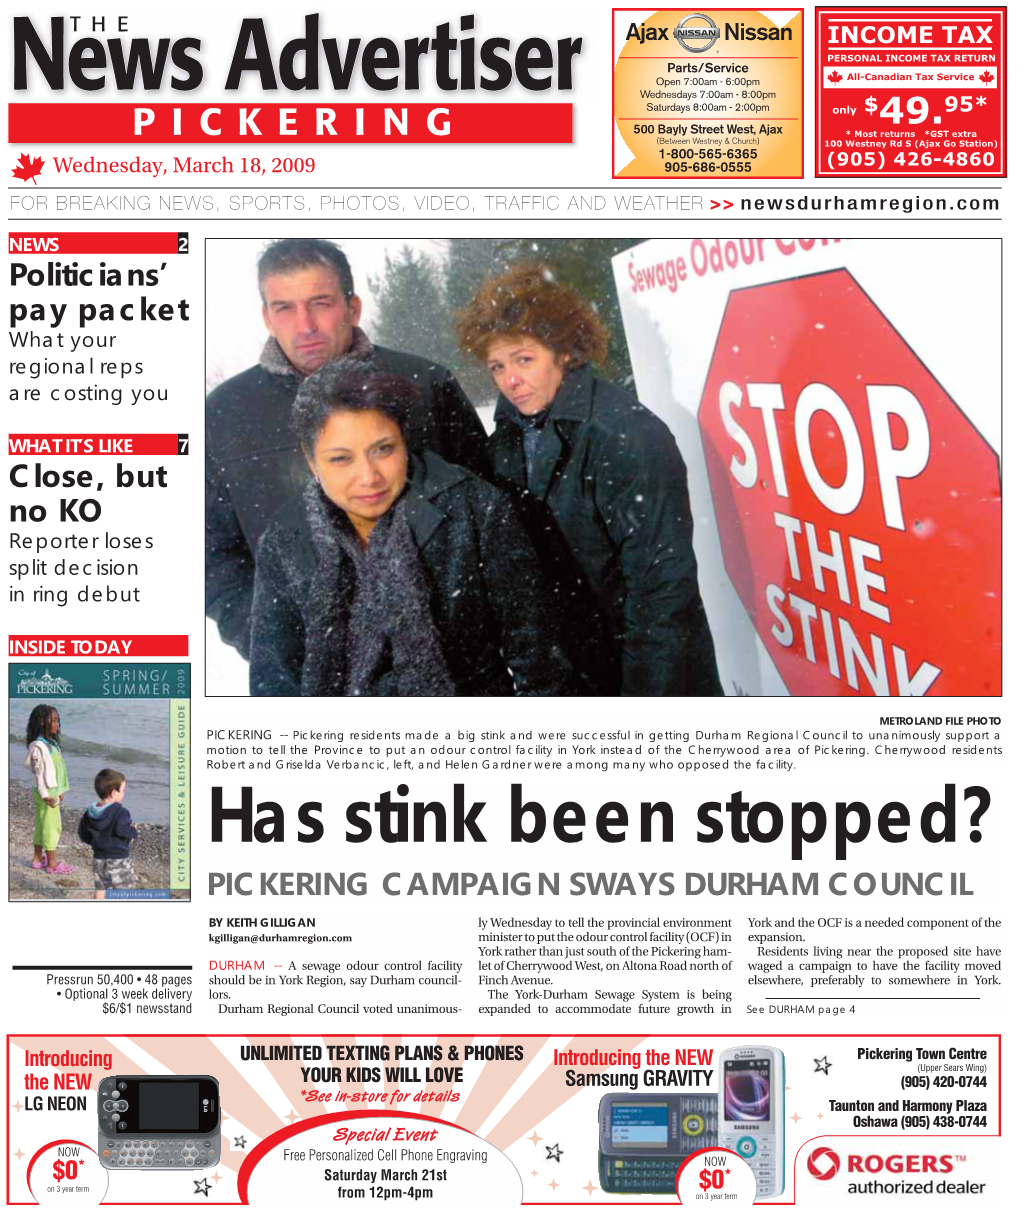 Has Stink Been Stopped? PICKERING CAMPAIGN SWAYS DURHAM COUNCIL